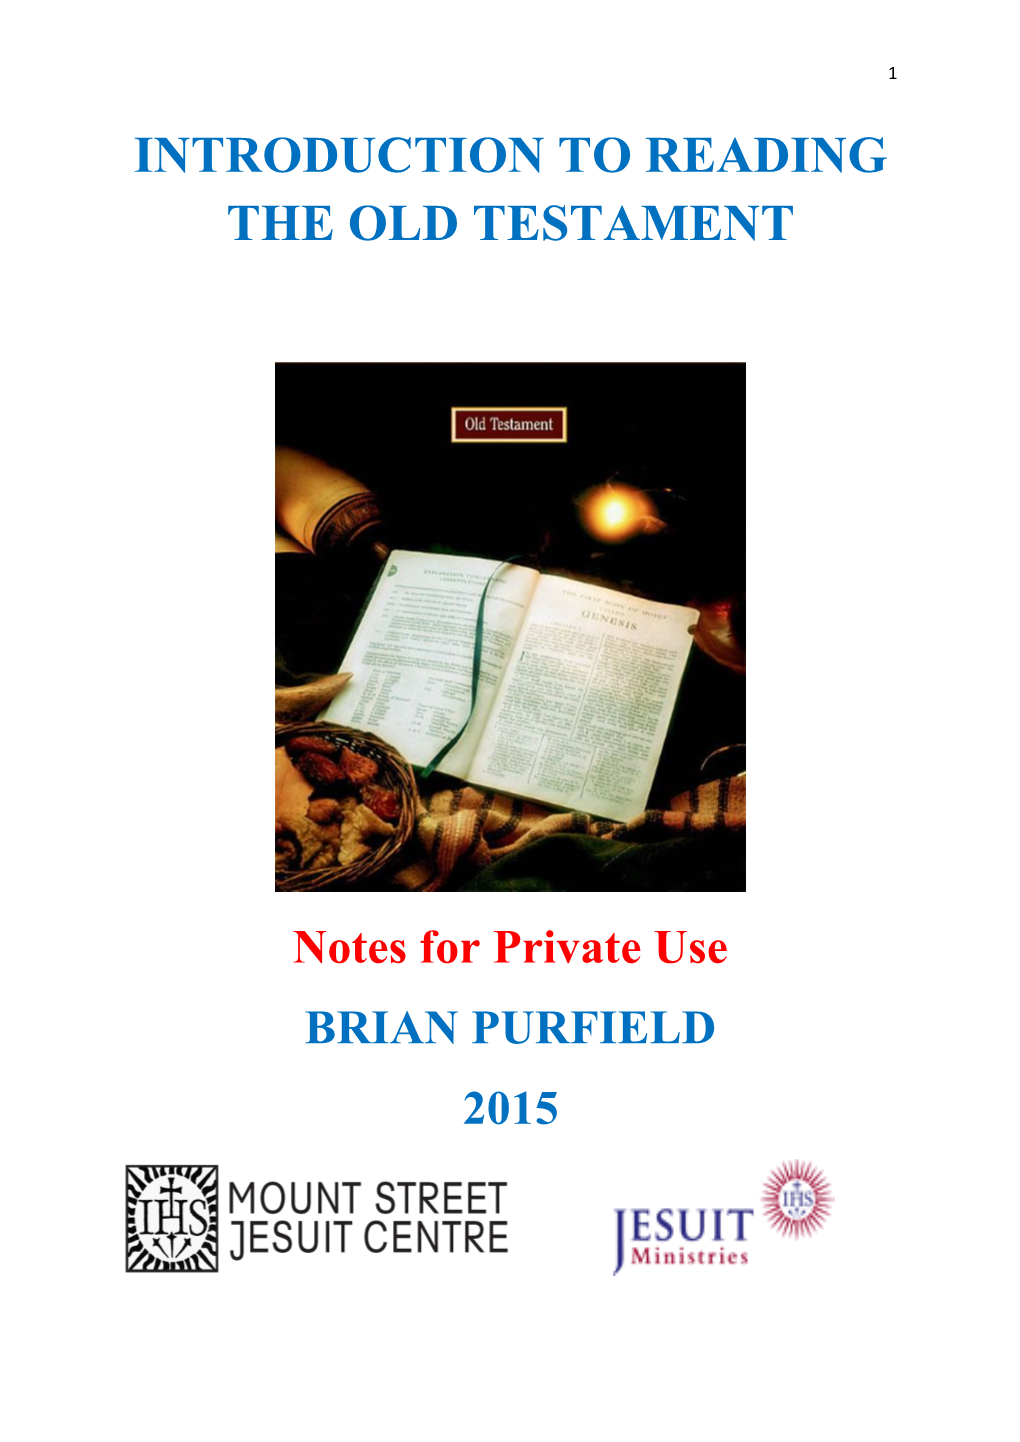 Introduction to Reading the Old Testament